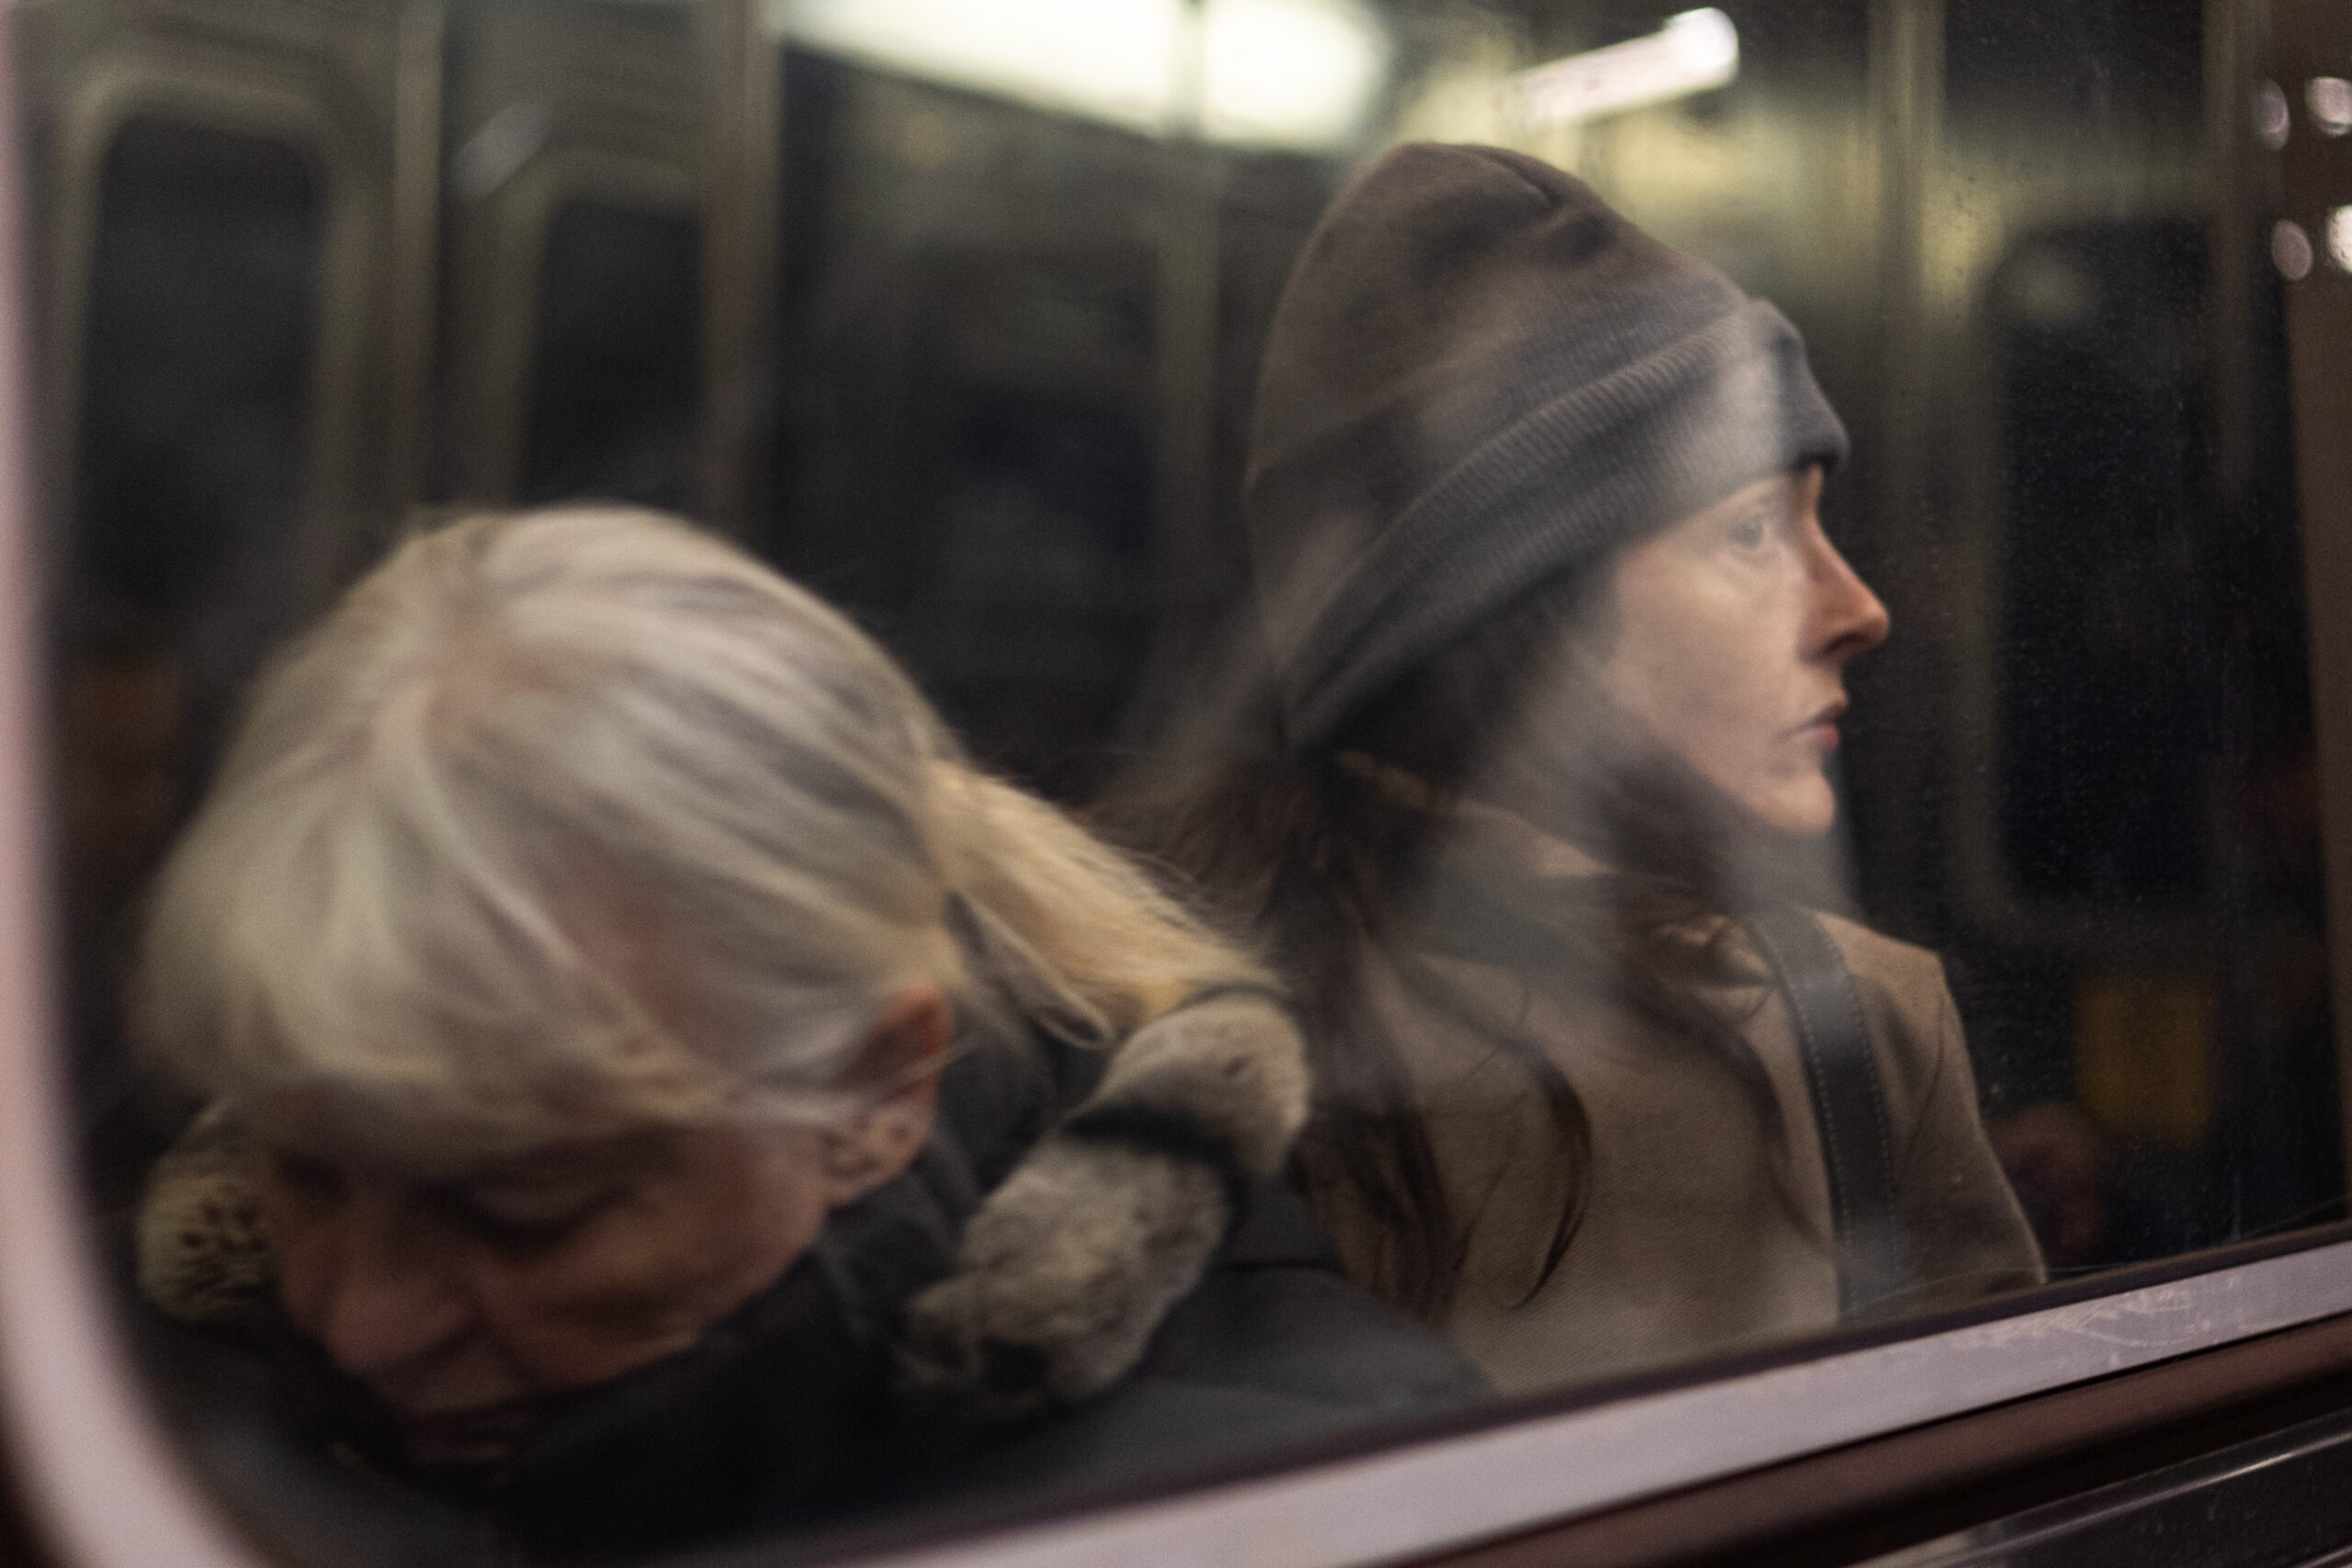 A woman stares into the abyss from inside a subway car. Her face is illuminated by a triangle of light cast from the reflection on the car’s window. Her back is towards the camera and only her profile can be seen. She is wearing a grey toque and a brown wool coat, which is a similar colour to her hair.  An older woman sitting closer to the camera looks down at her lap. The women sit back to back and neither are in focus. They are framed by strokes of metal.